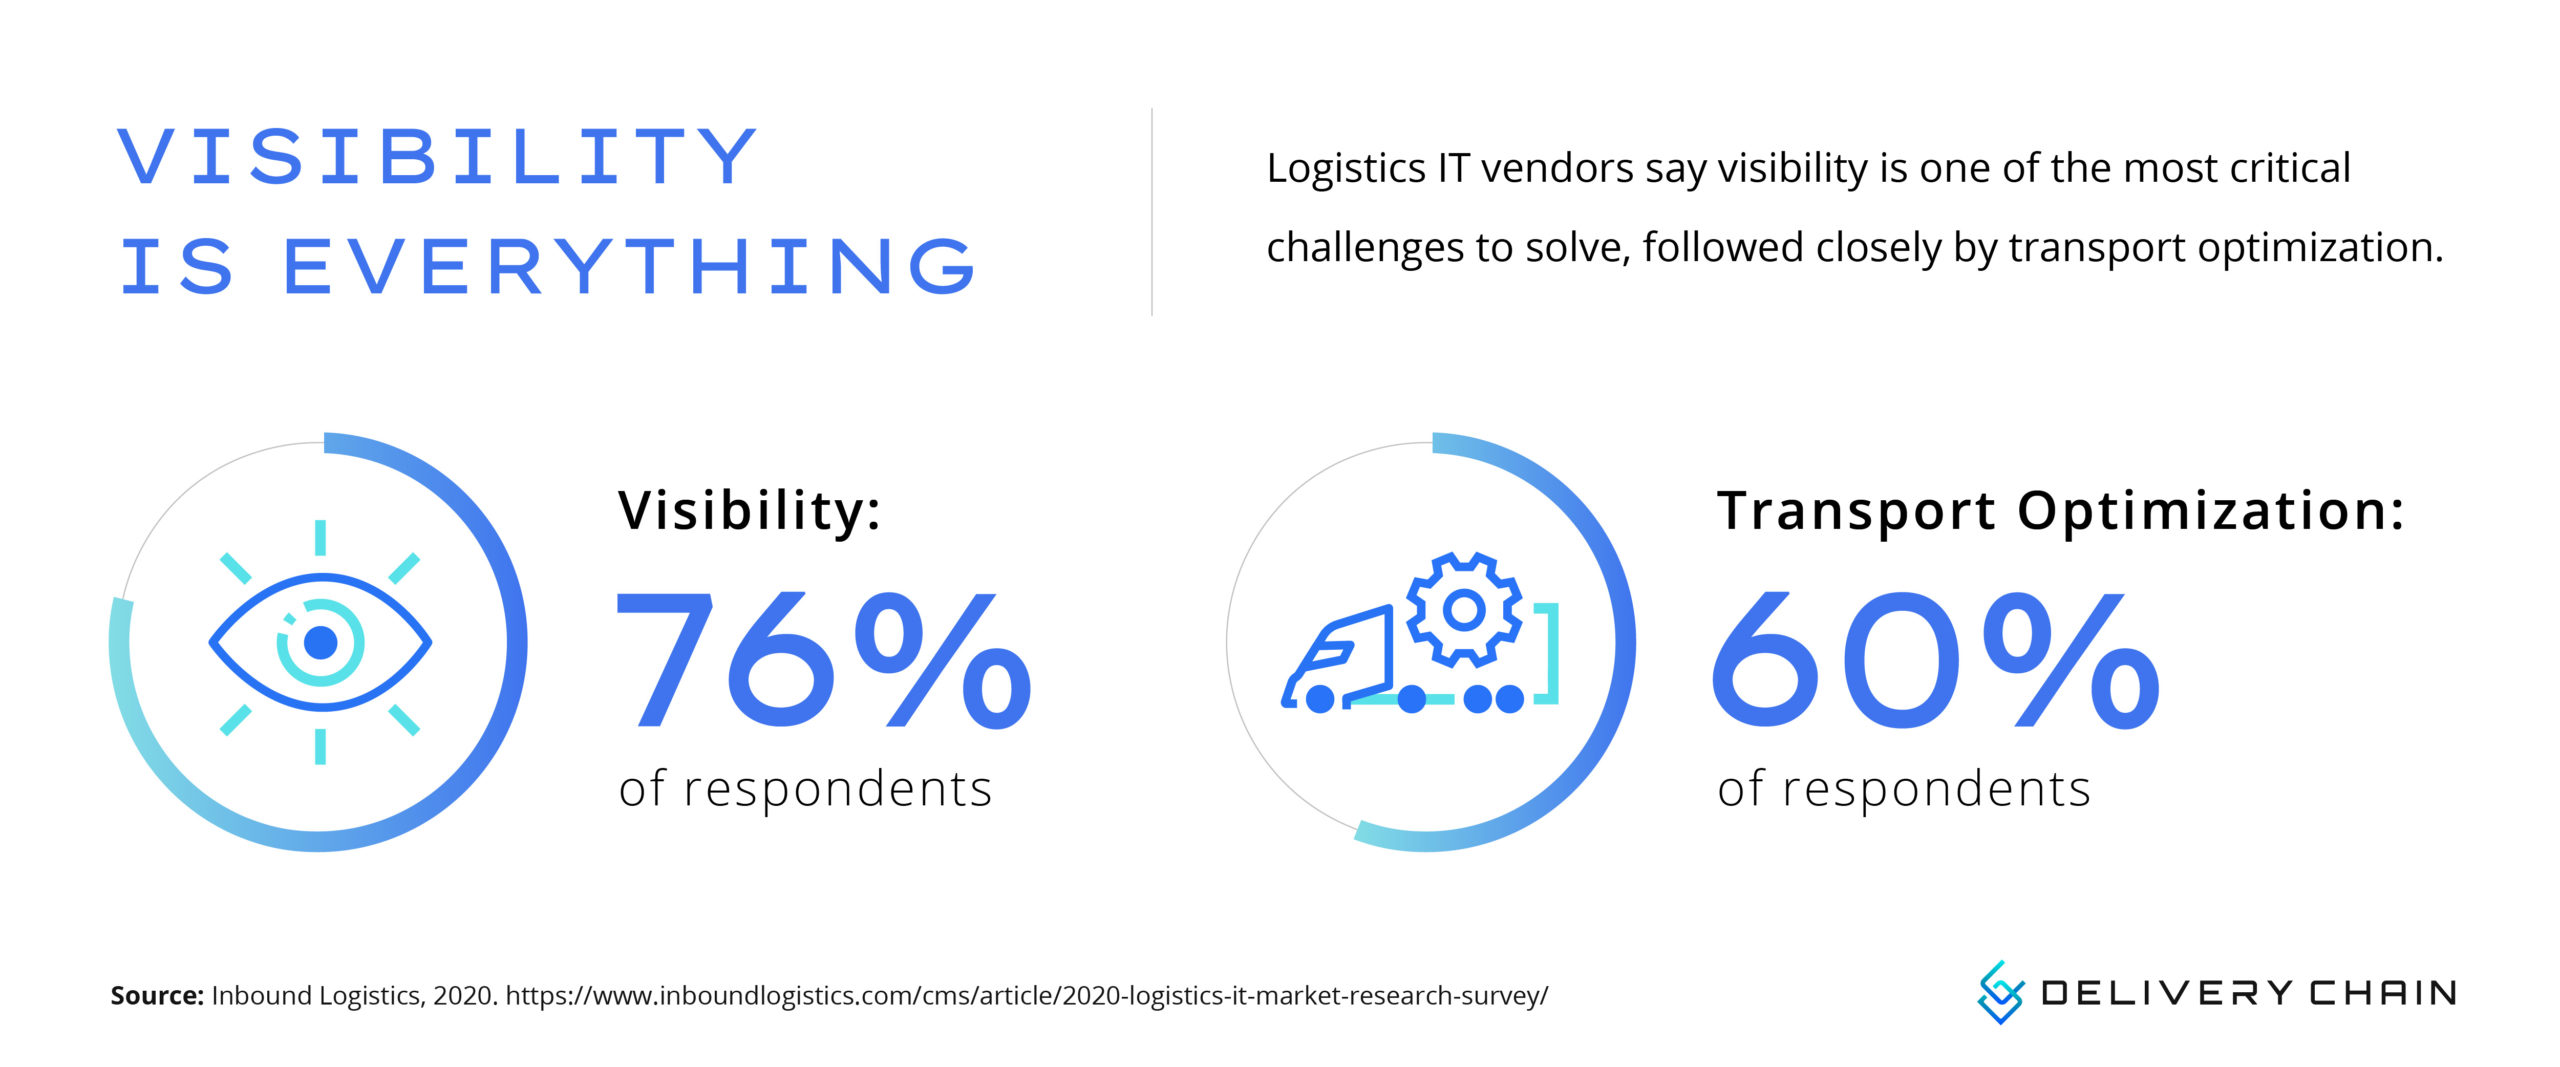 76% believe that supply chain visibility is everything